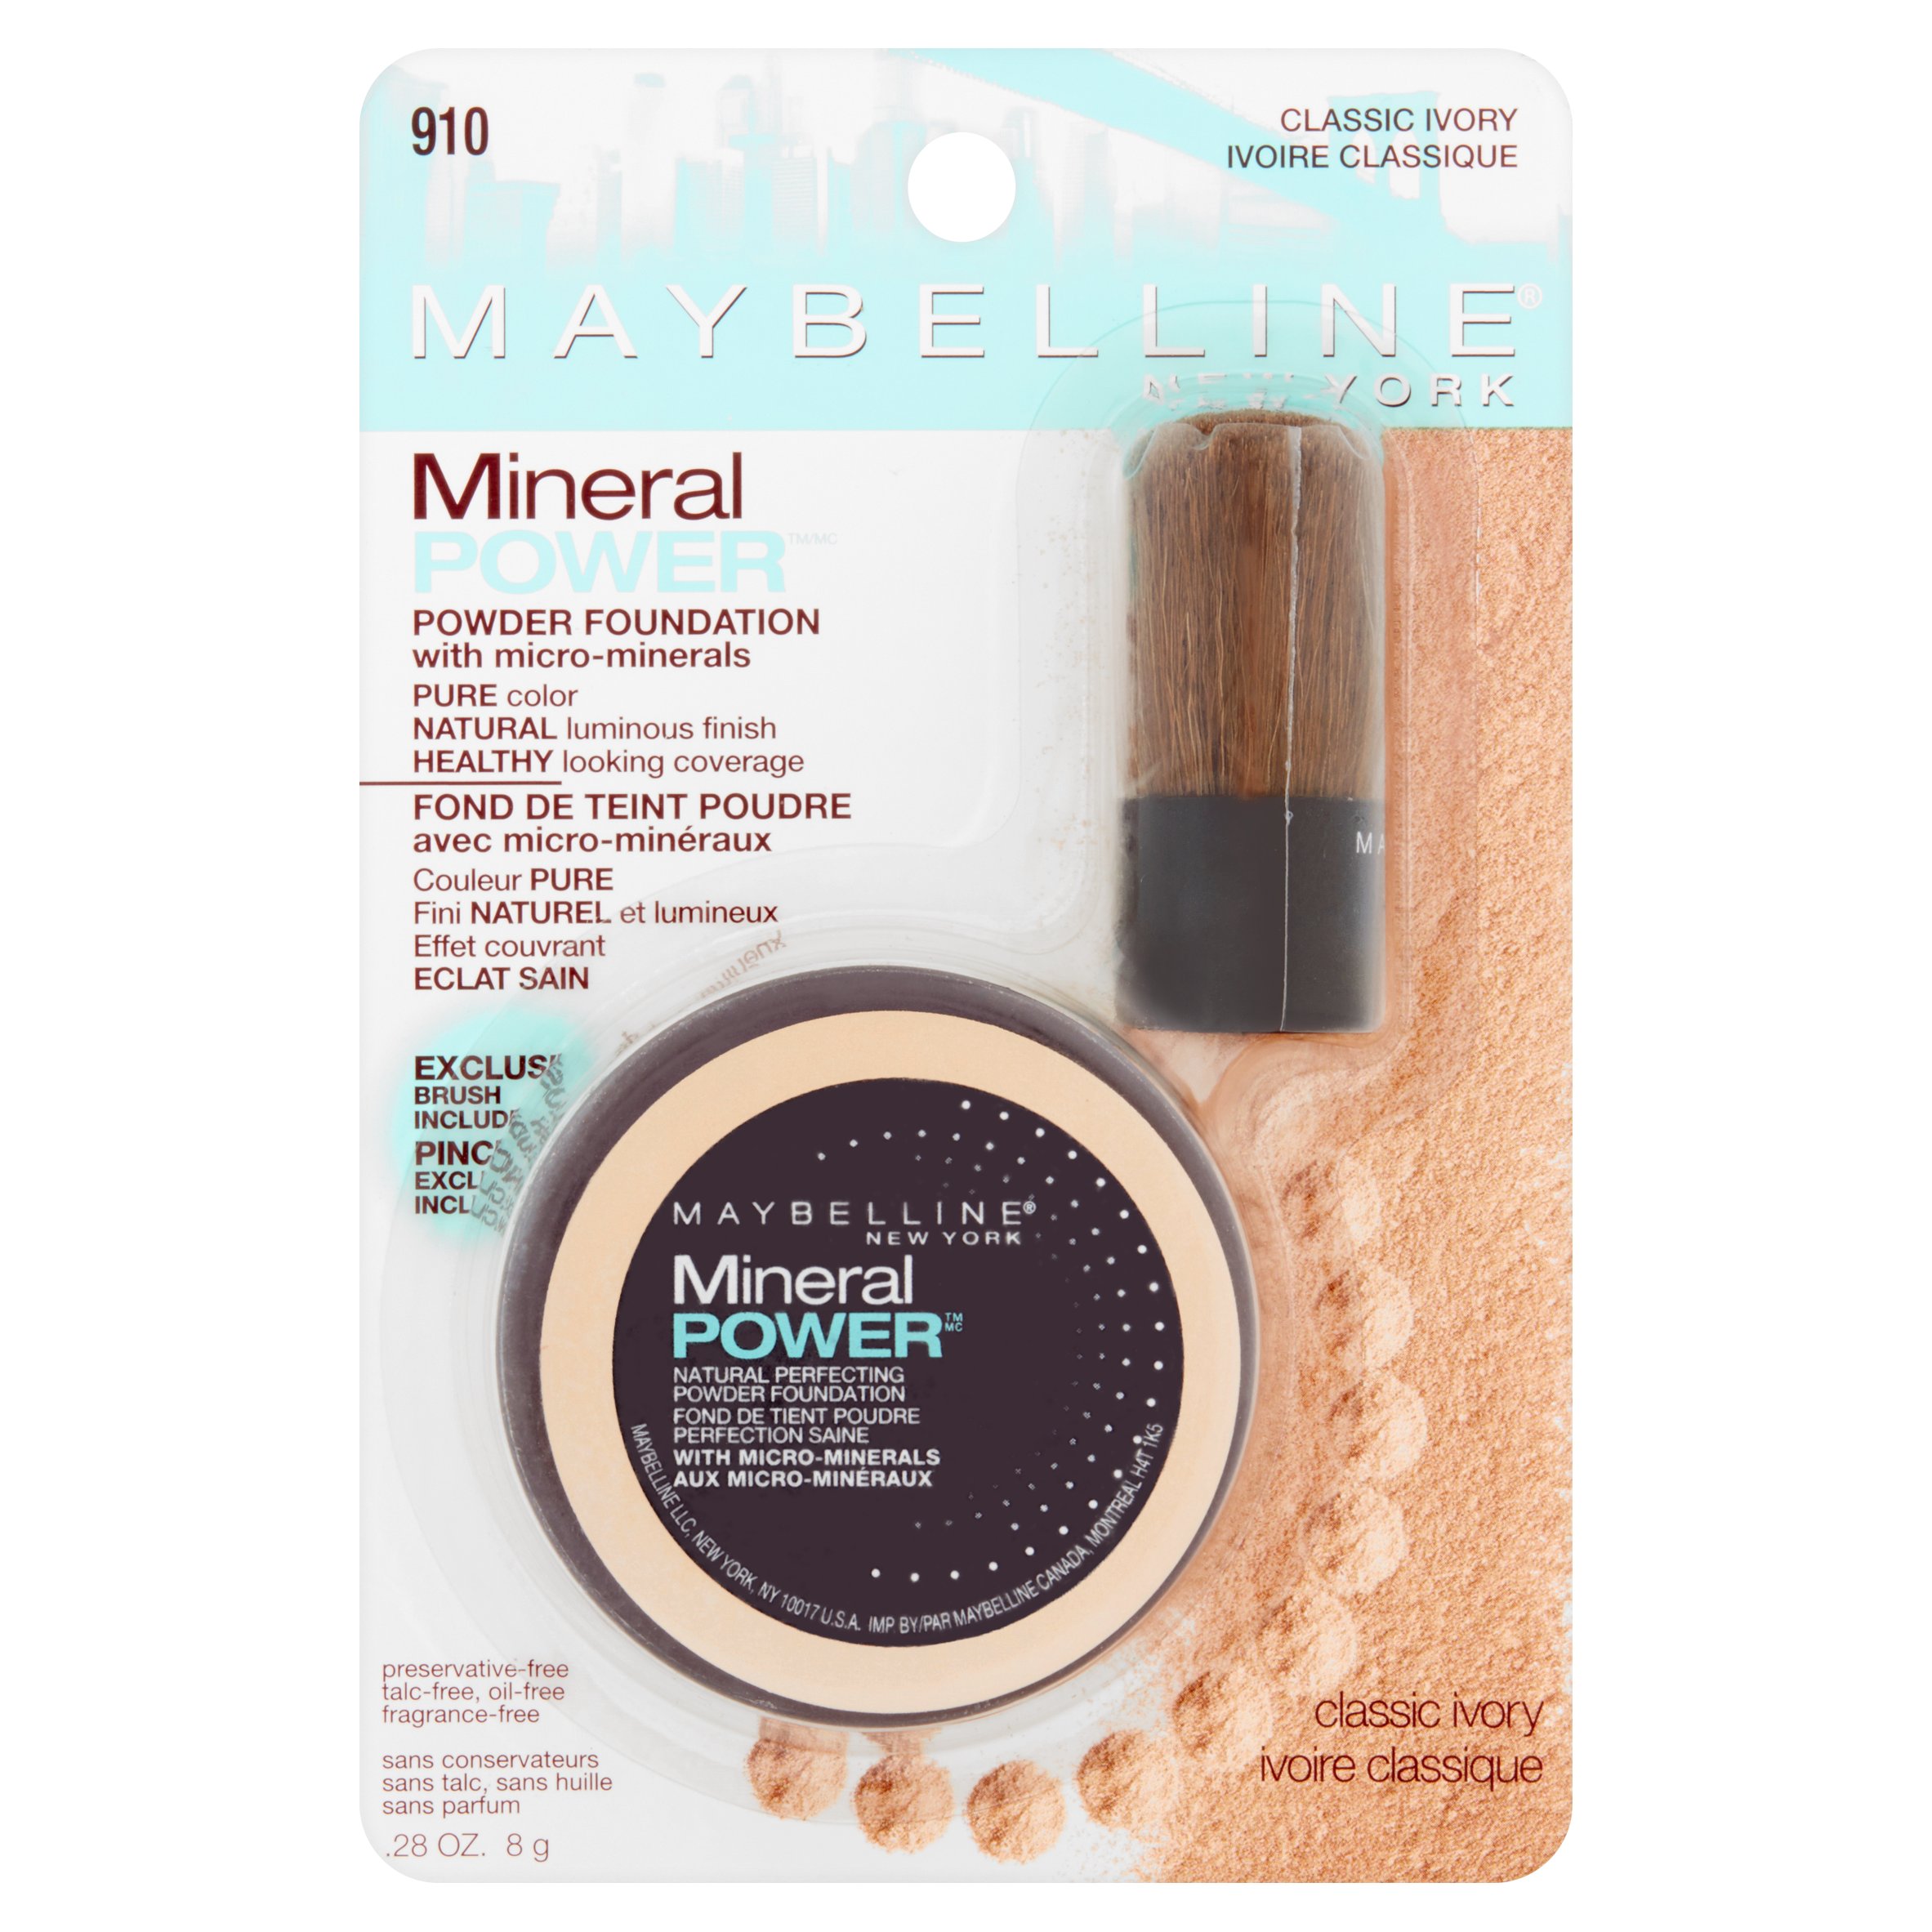 Maybelline Mineral Power Powder Foundation Makeup, Classic Ivory, 0.28 fl oz - image 1 of 4